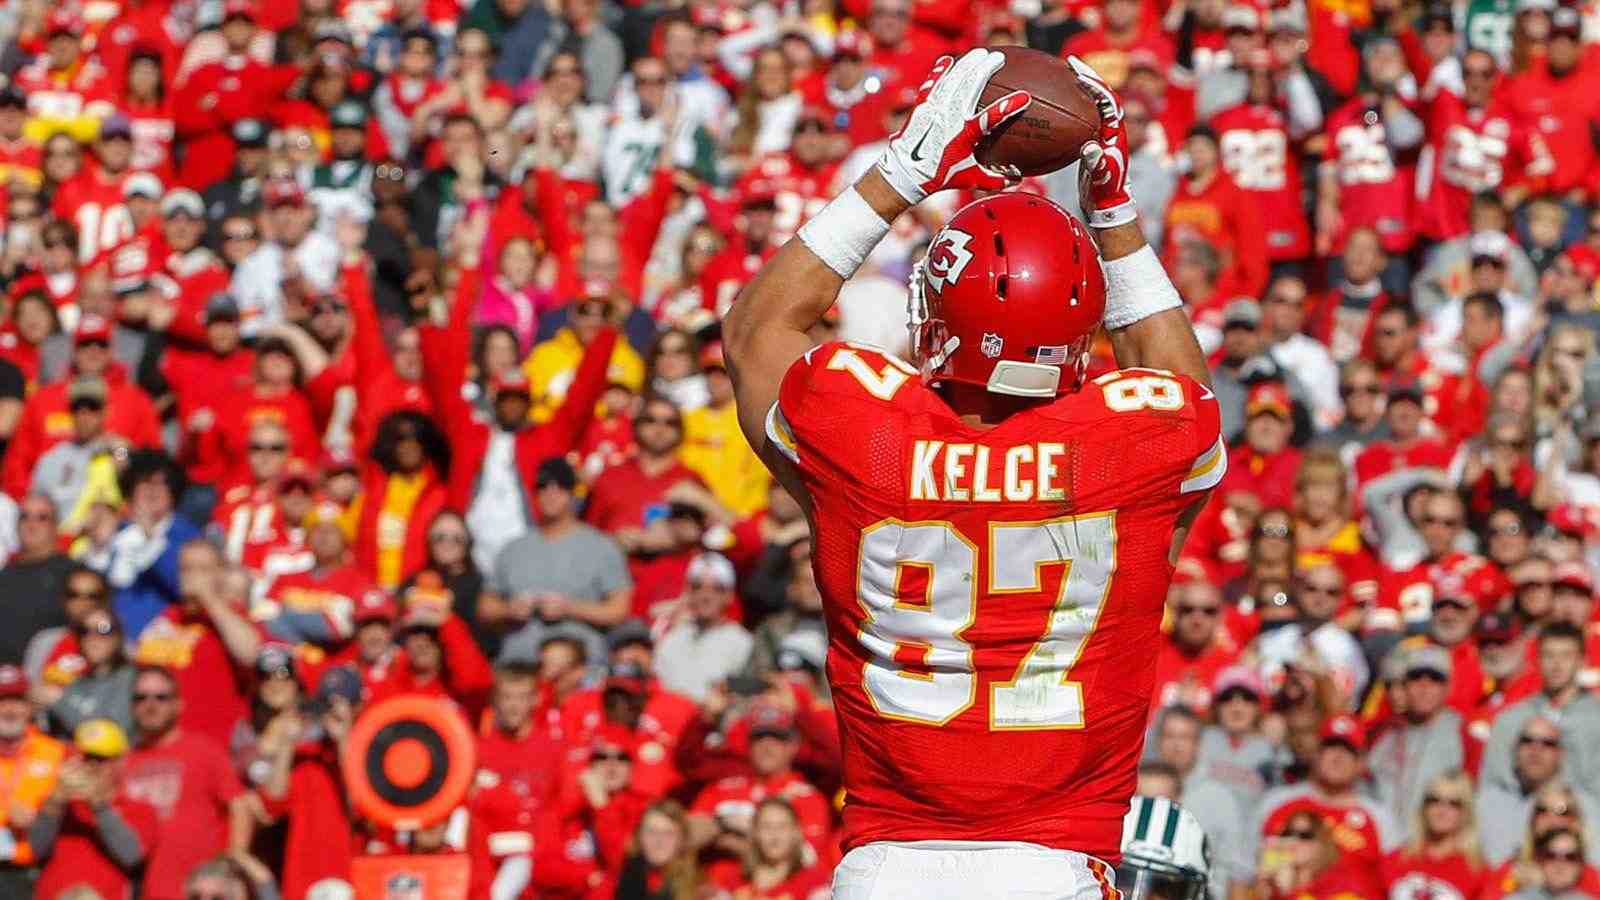 Get ready for a sizzling tour of Travis Kelce shirtless thirst traps. From killer abs to inky artistry, the NFL’s pro tight end scores off-field touchdowns, too!